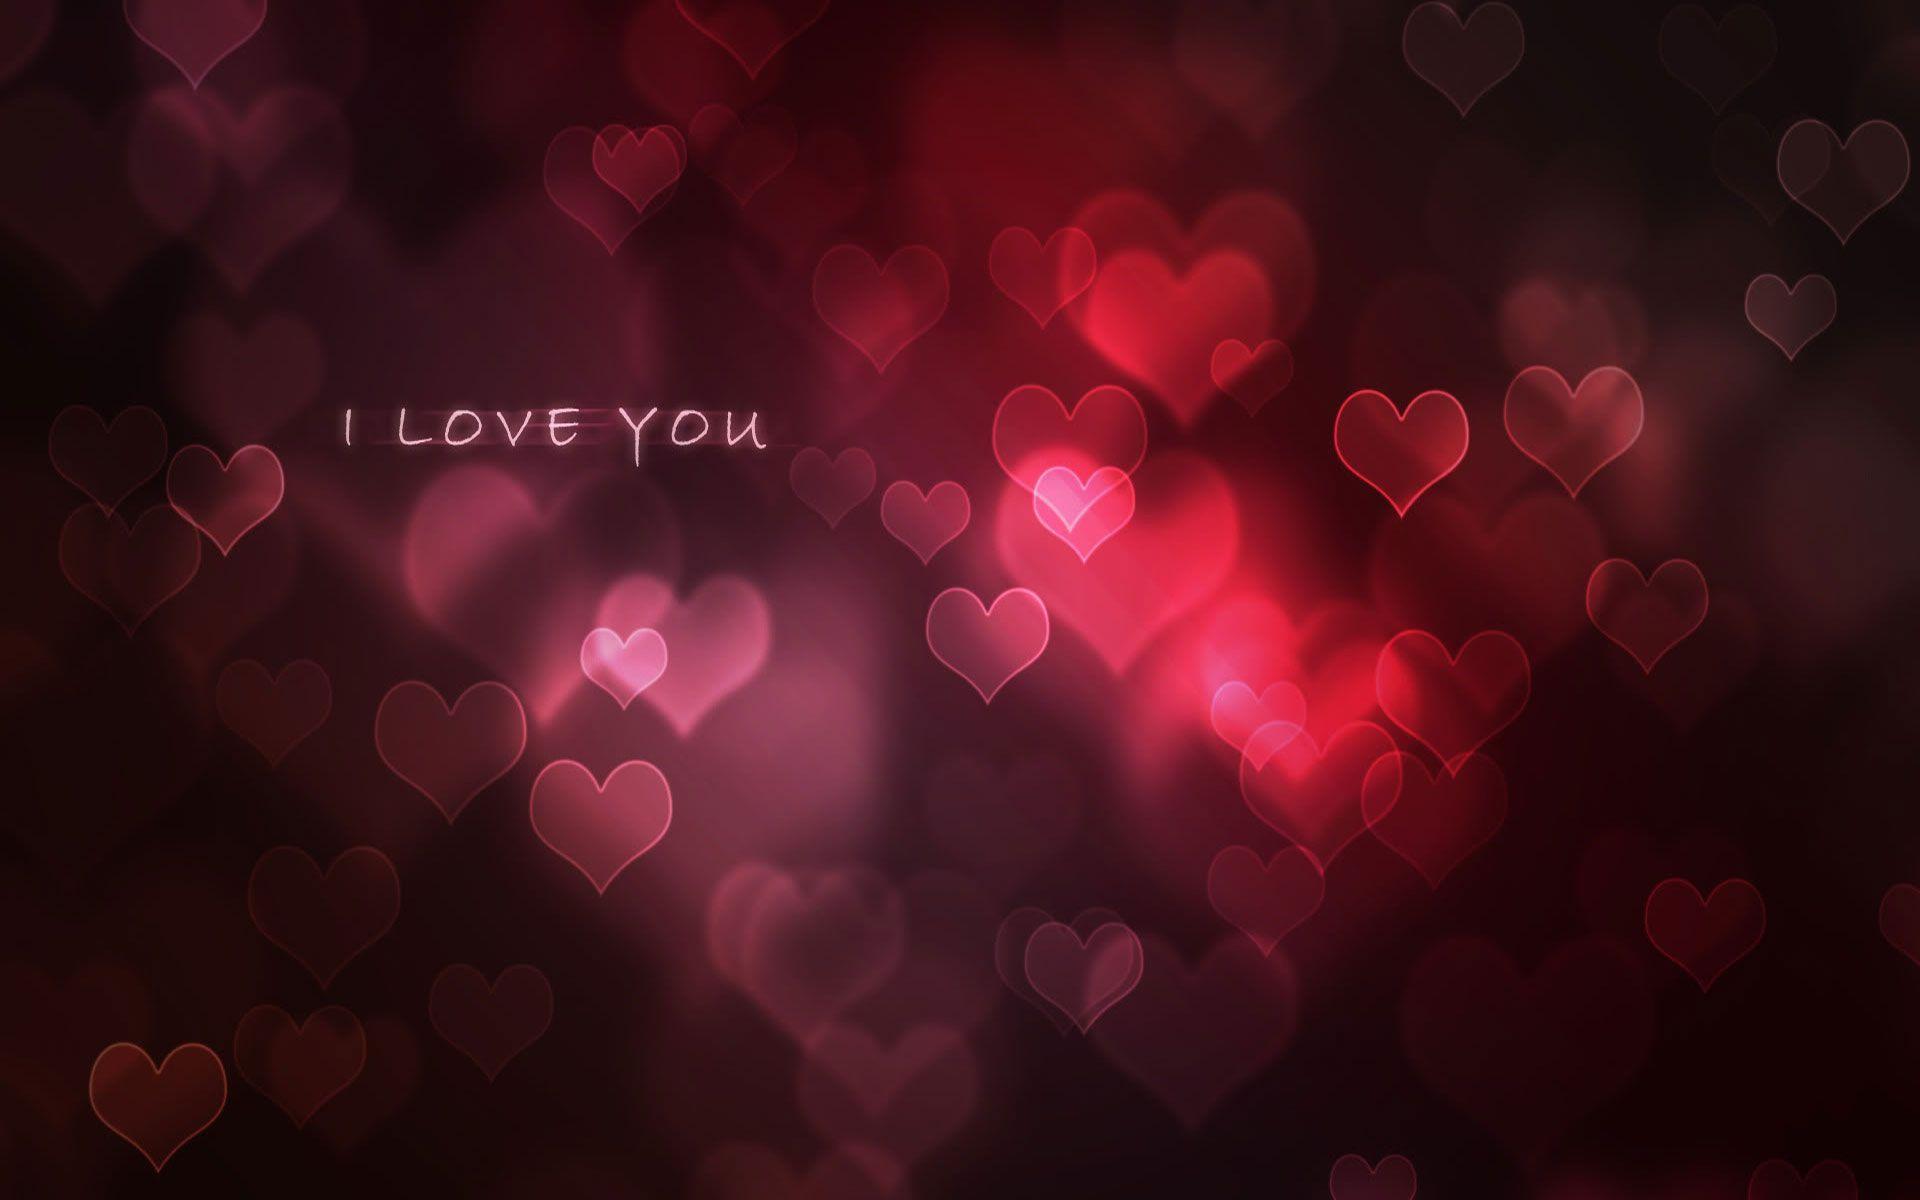 Free I Love You Wallpaper New HD Background Cute Image